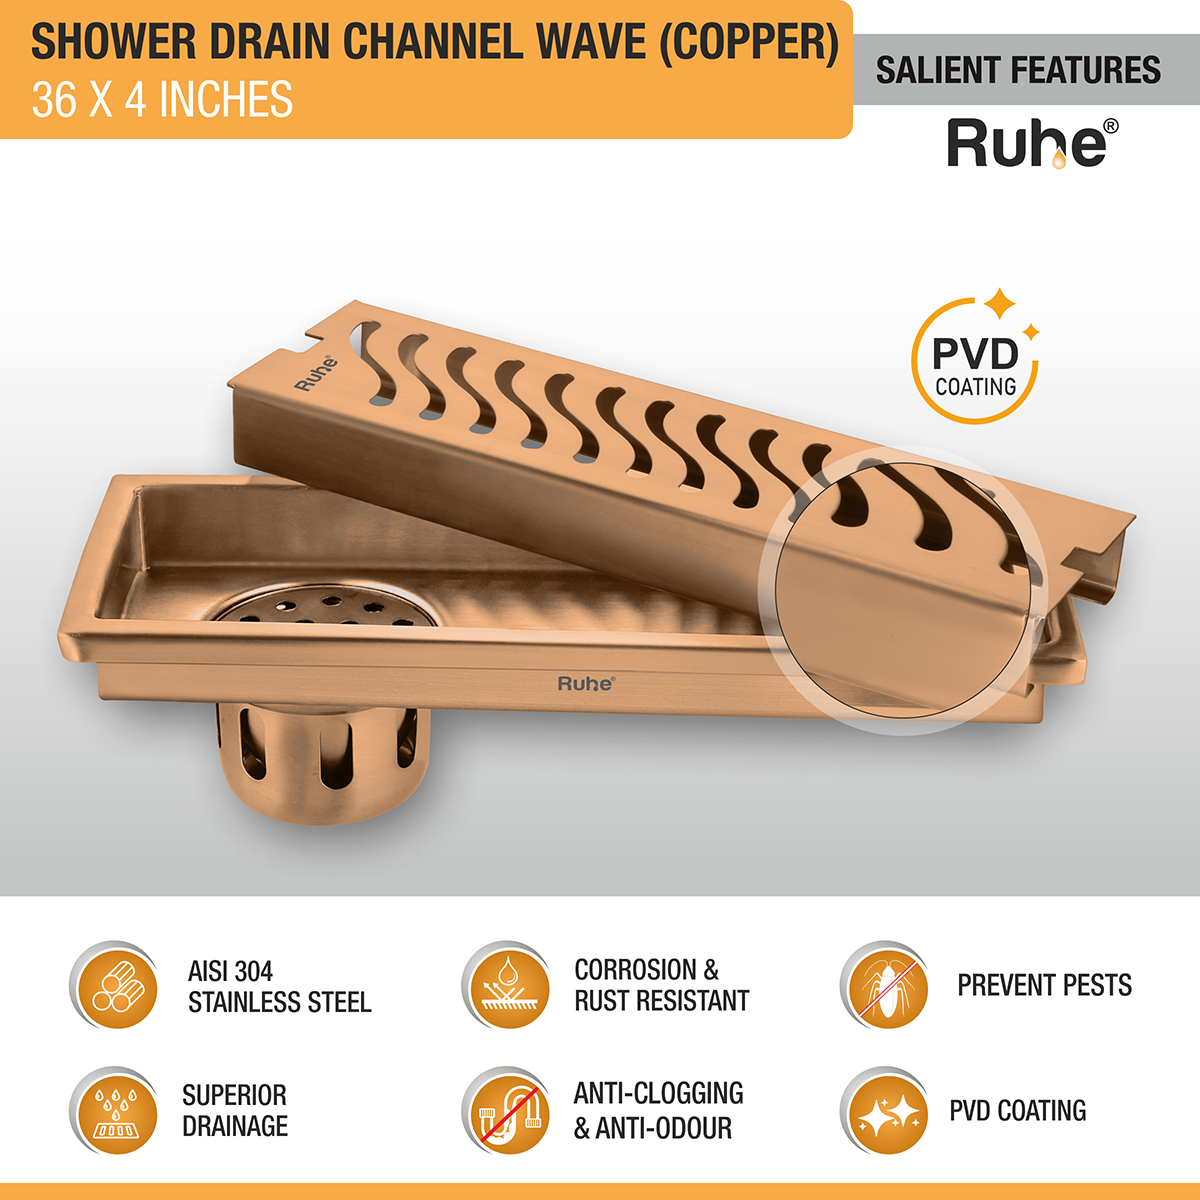 Wave Shower Drain Channel (36 x 4 Inches) ROSE GOLD/ANTIQUE COPPER features